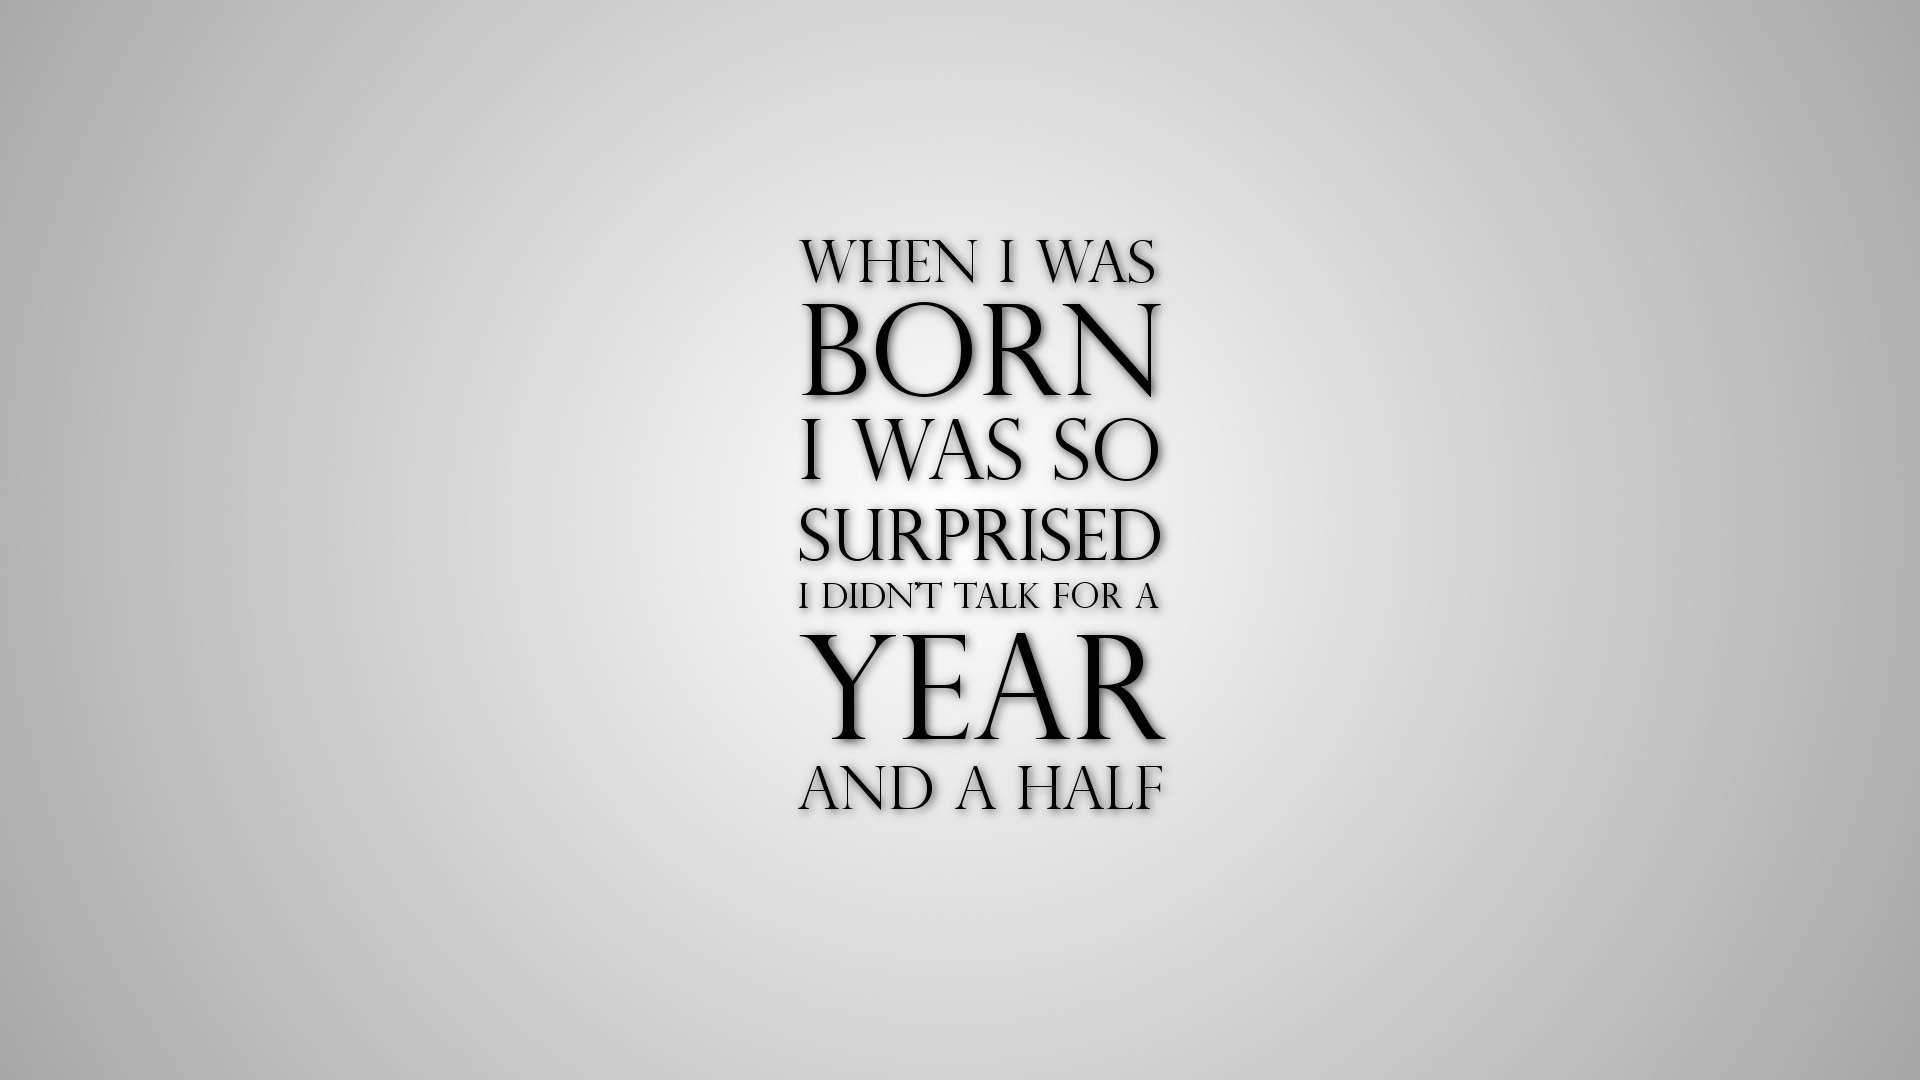 Funny Motivational Quote About Being Born